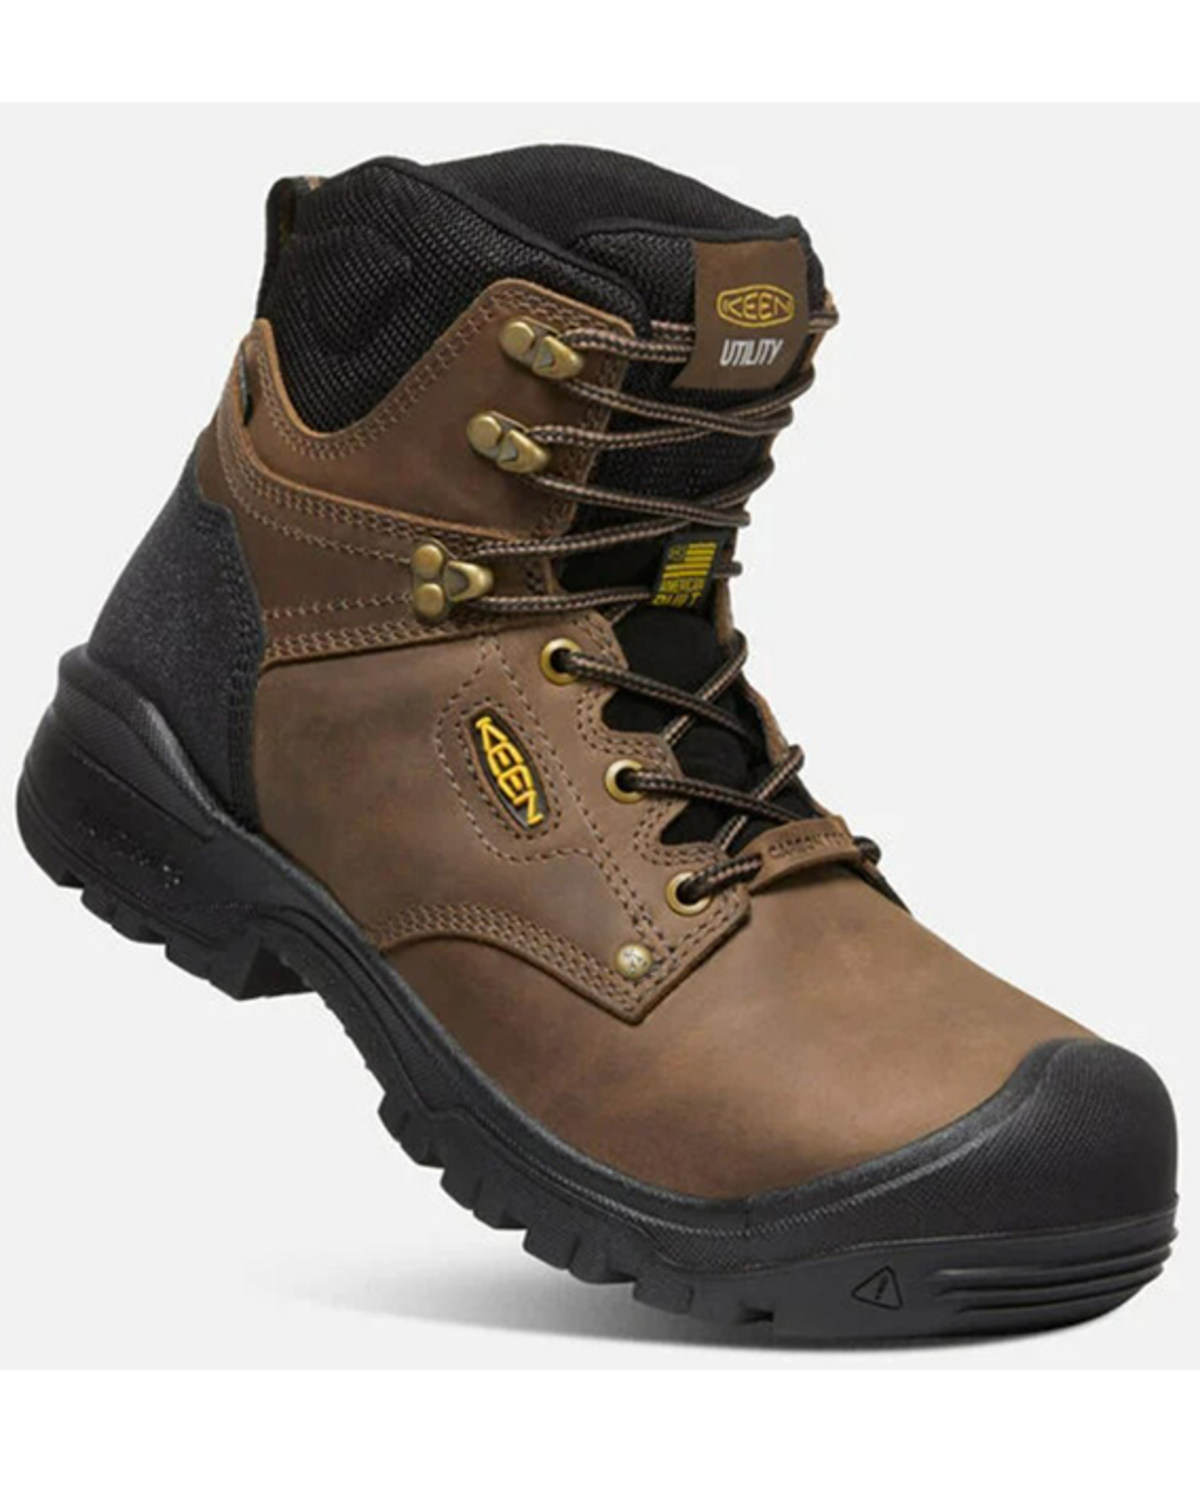 Keen Men's Independence 8" Work Boot - Round Toe